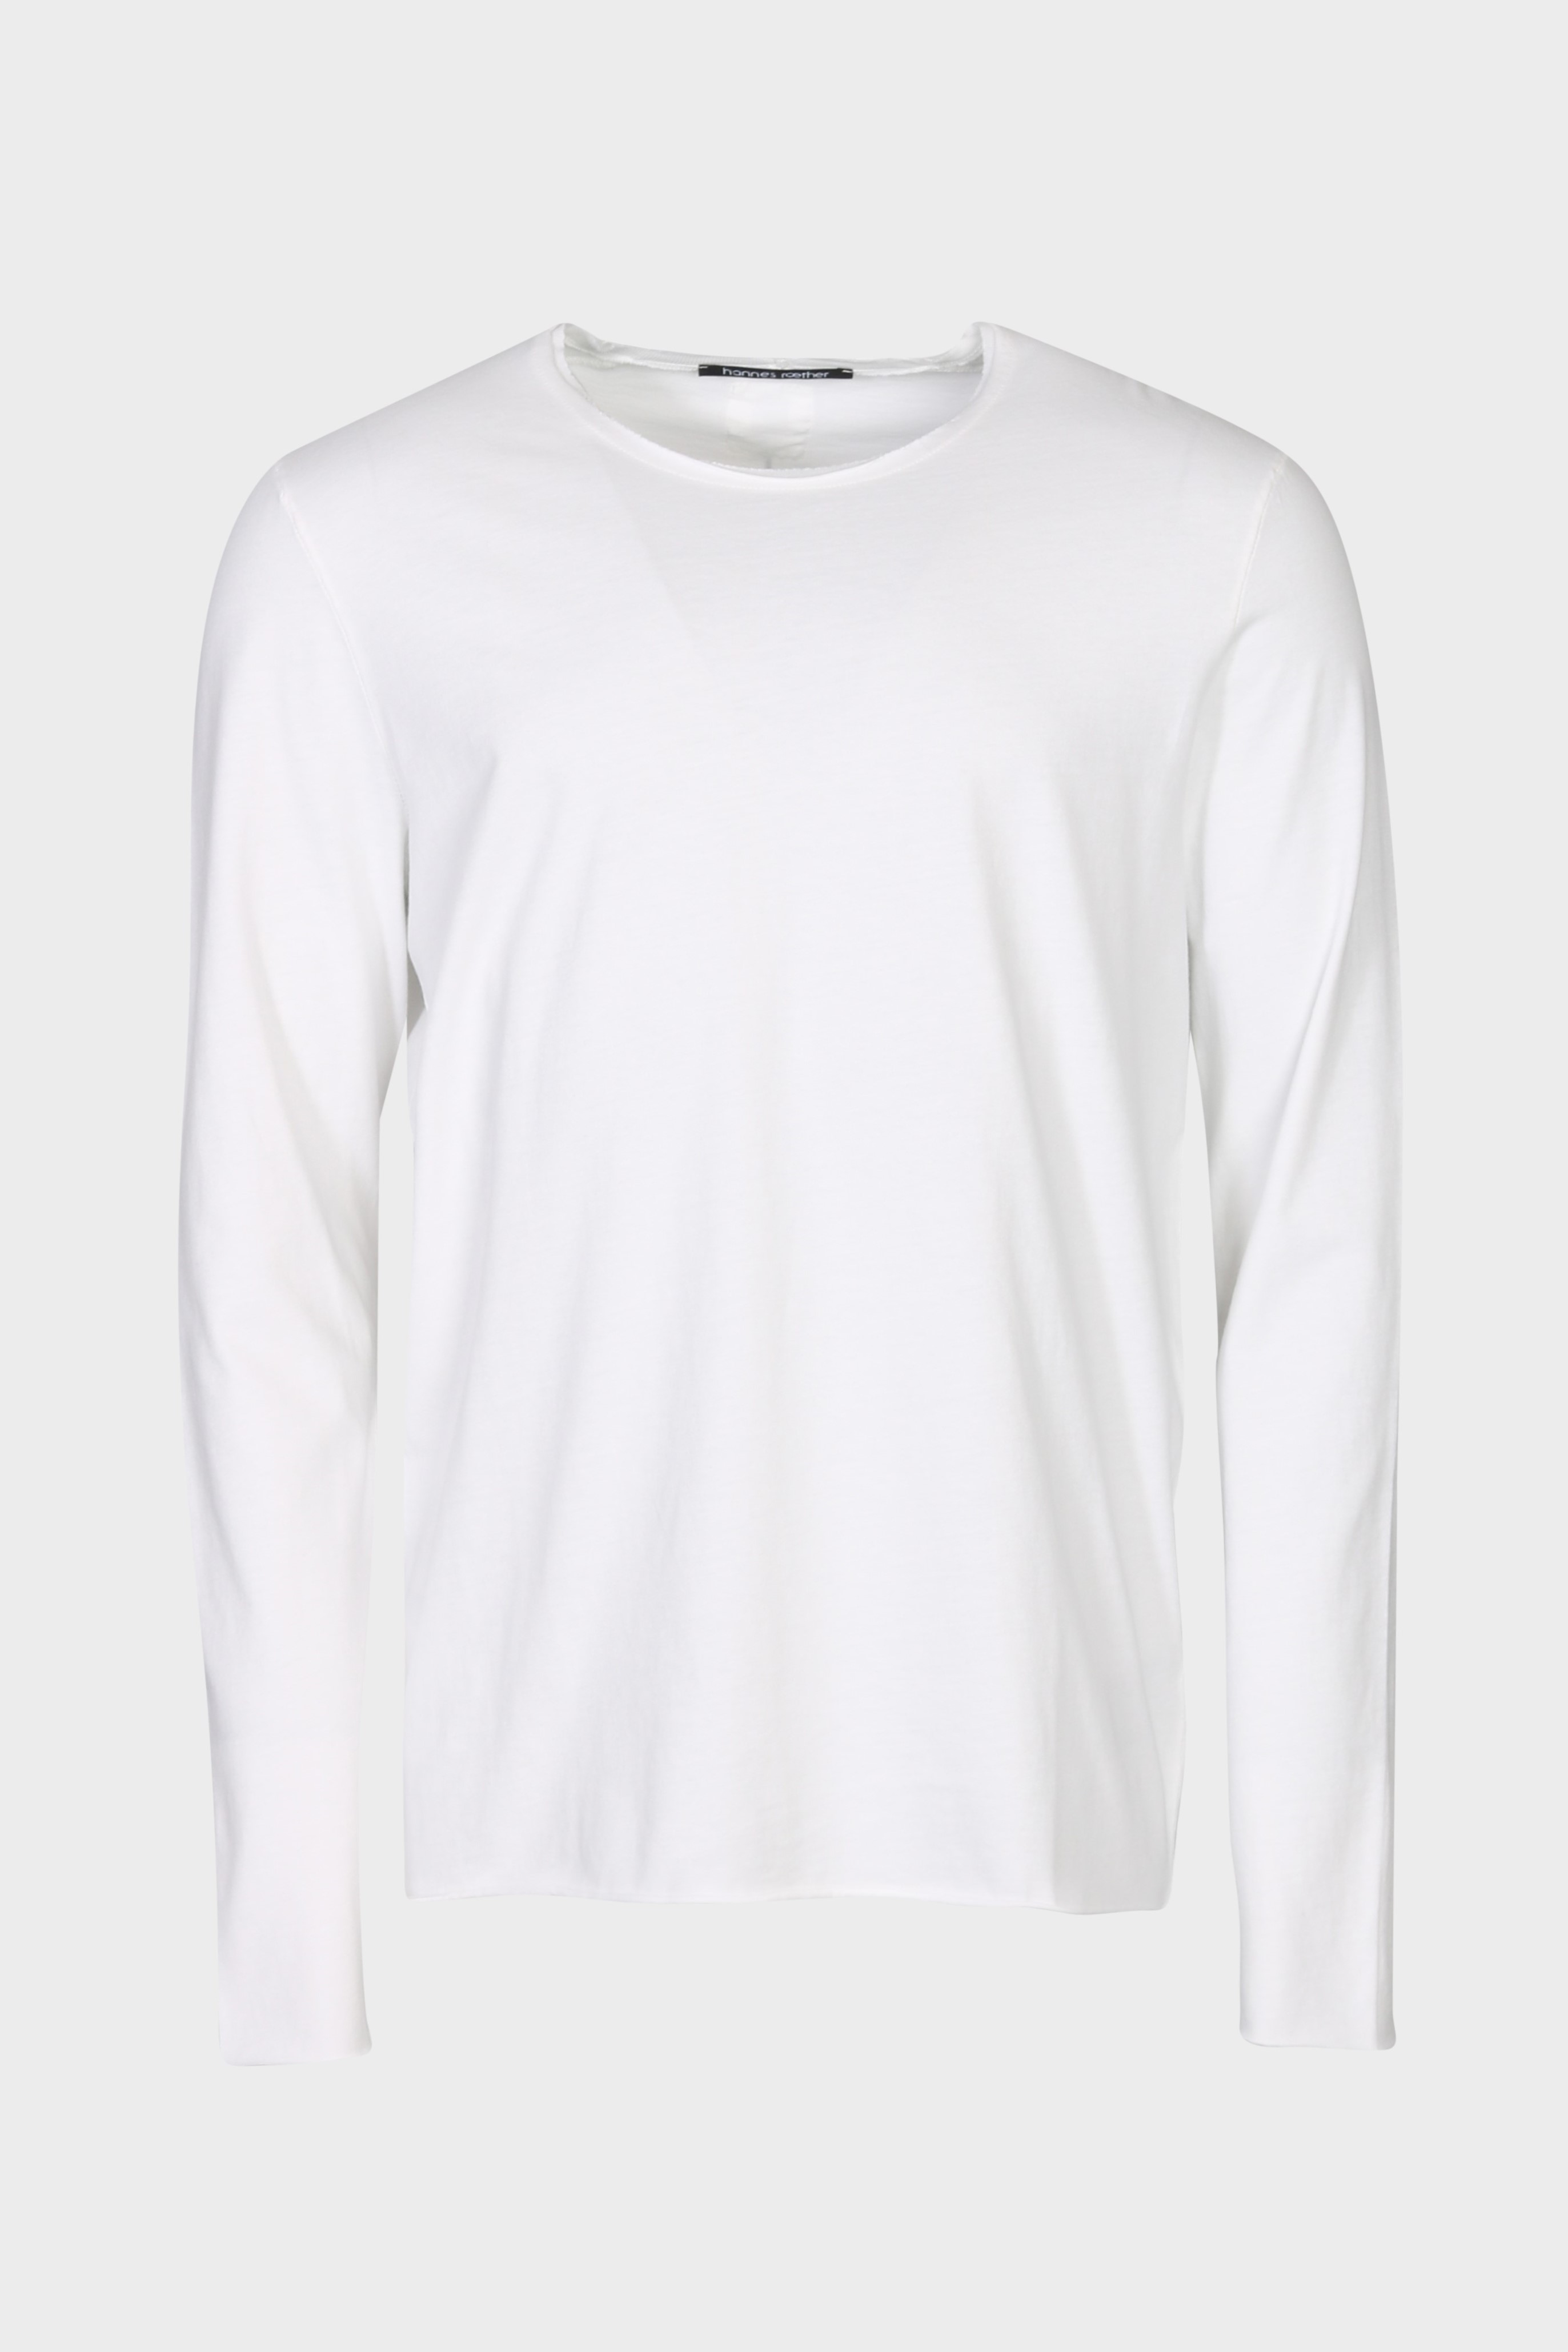 HANNES ROETHER Longsleeve in Off White 3XL